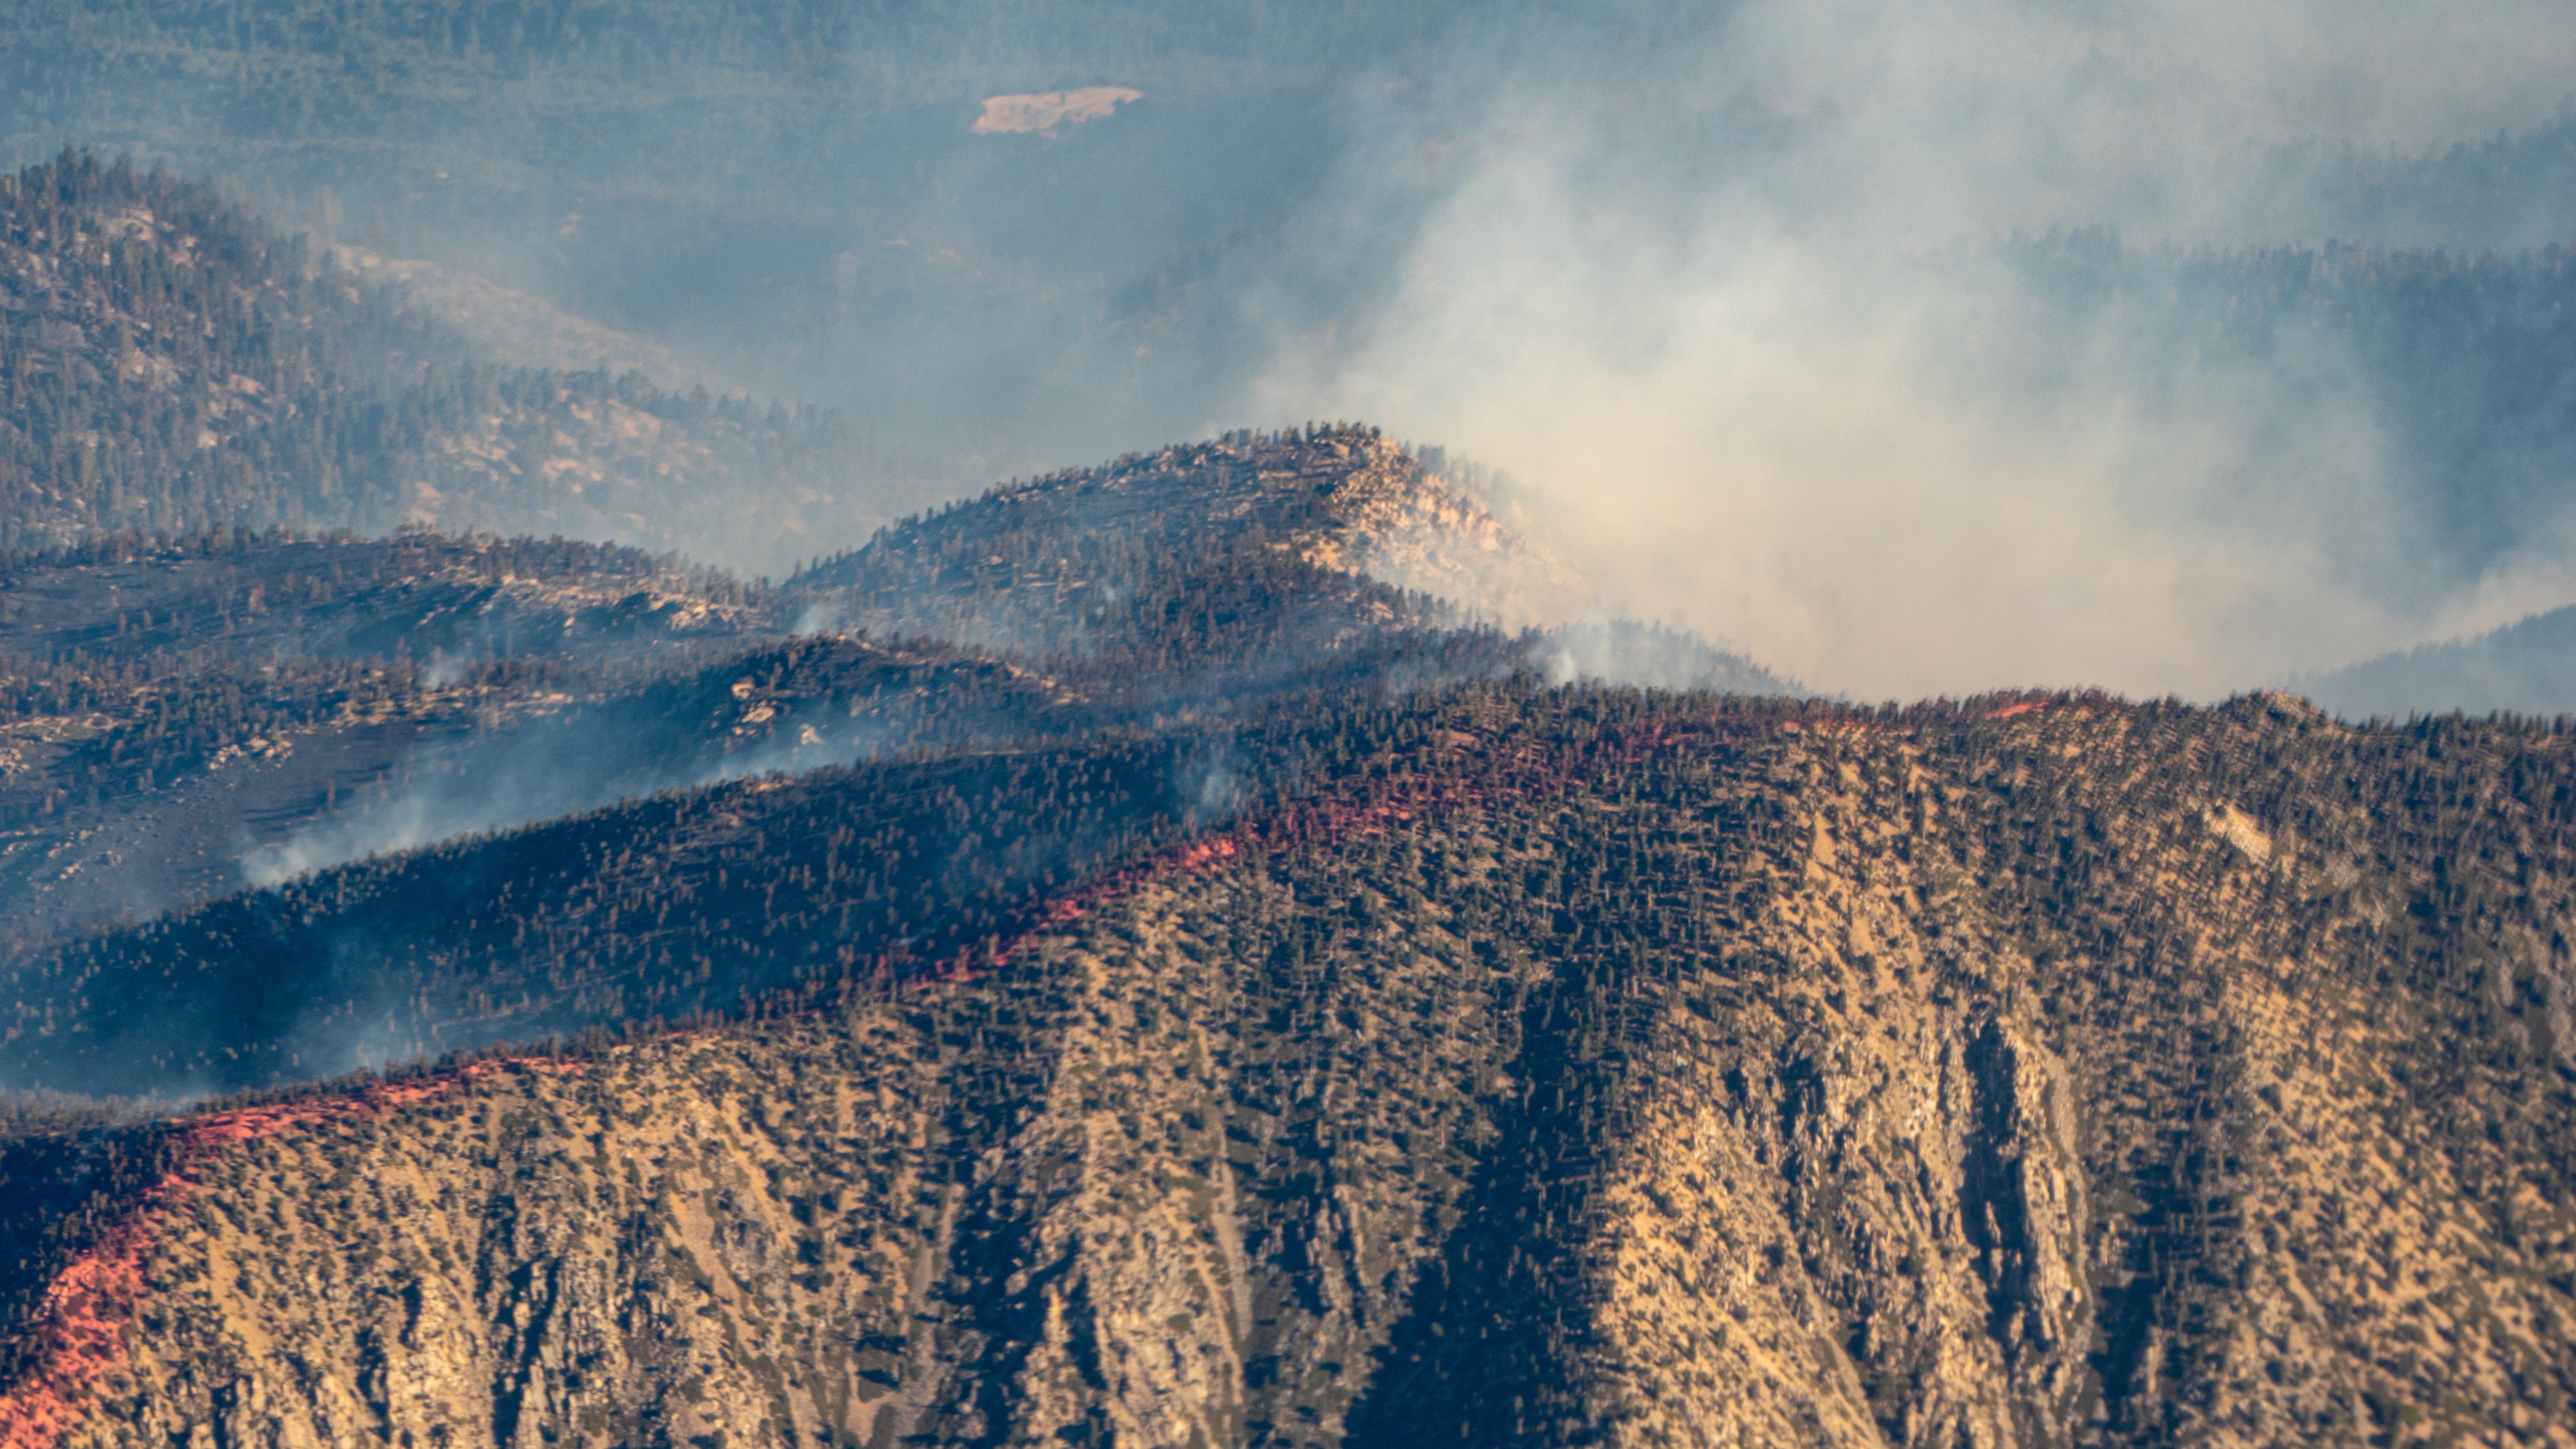 A controlled burn on the CA mountains